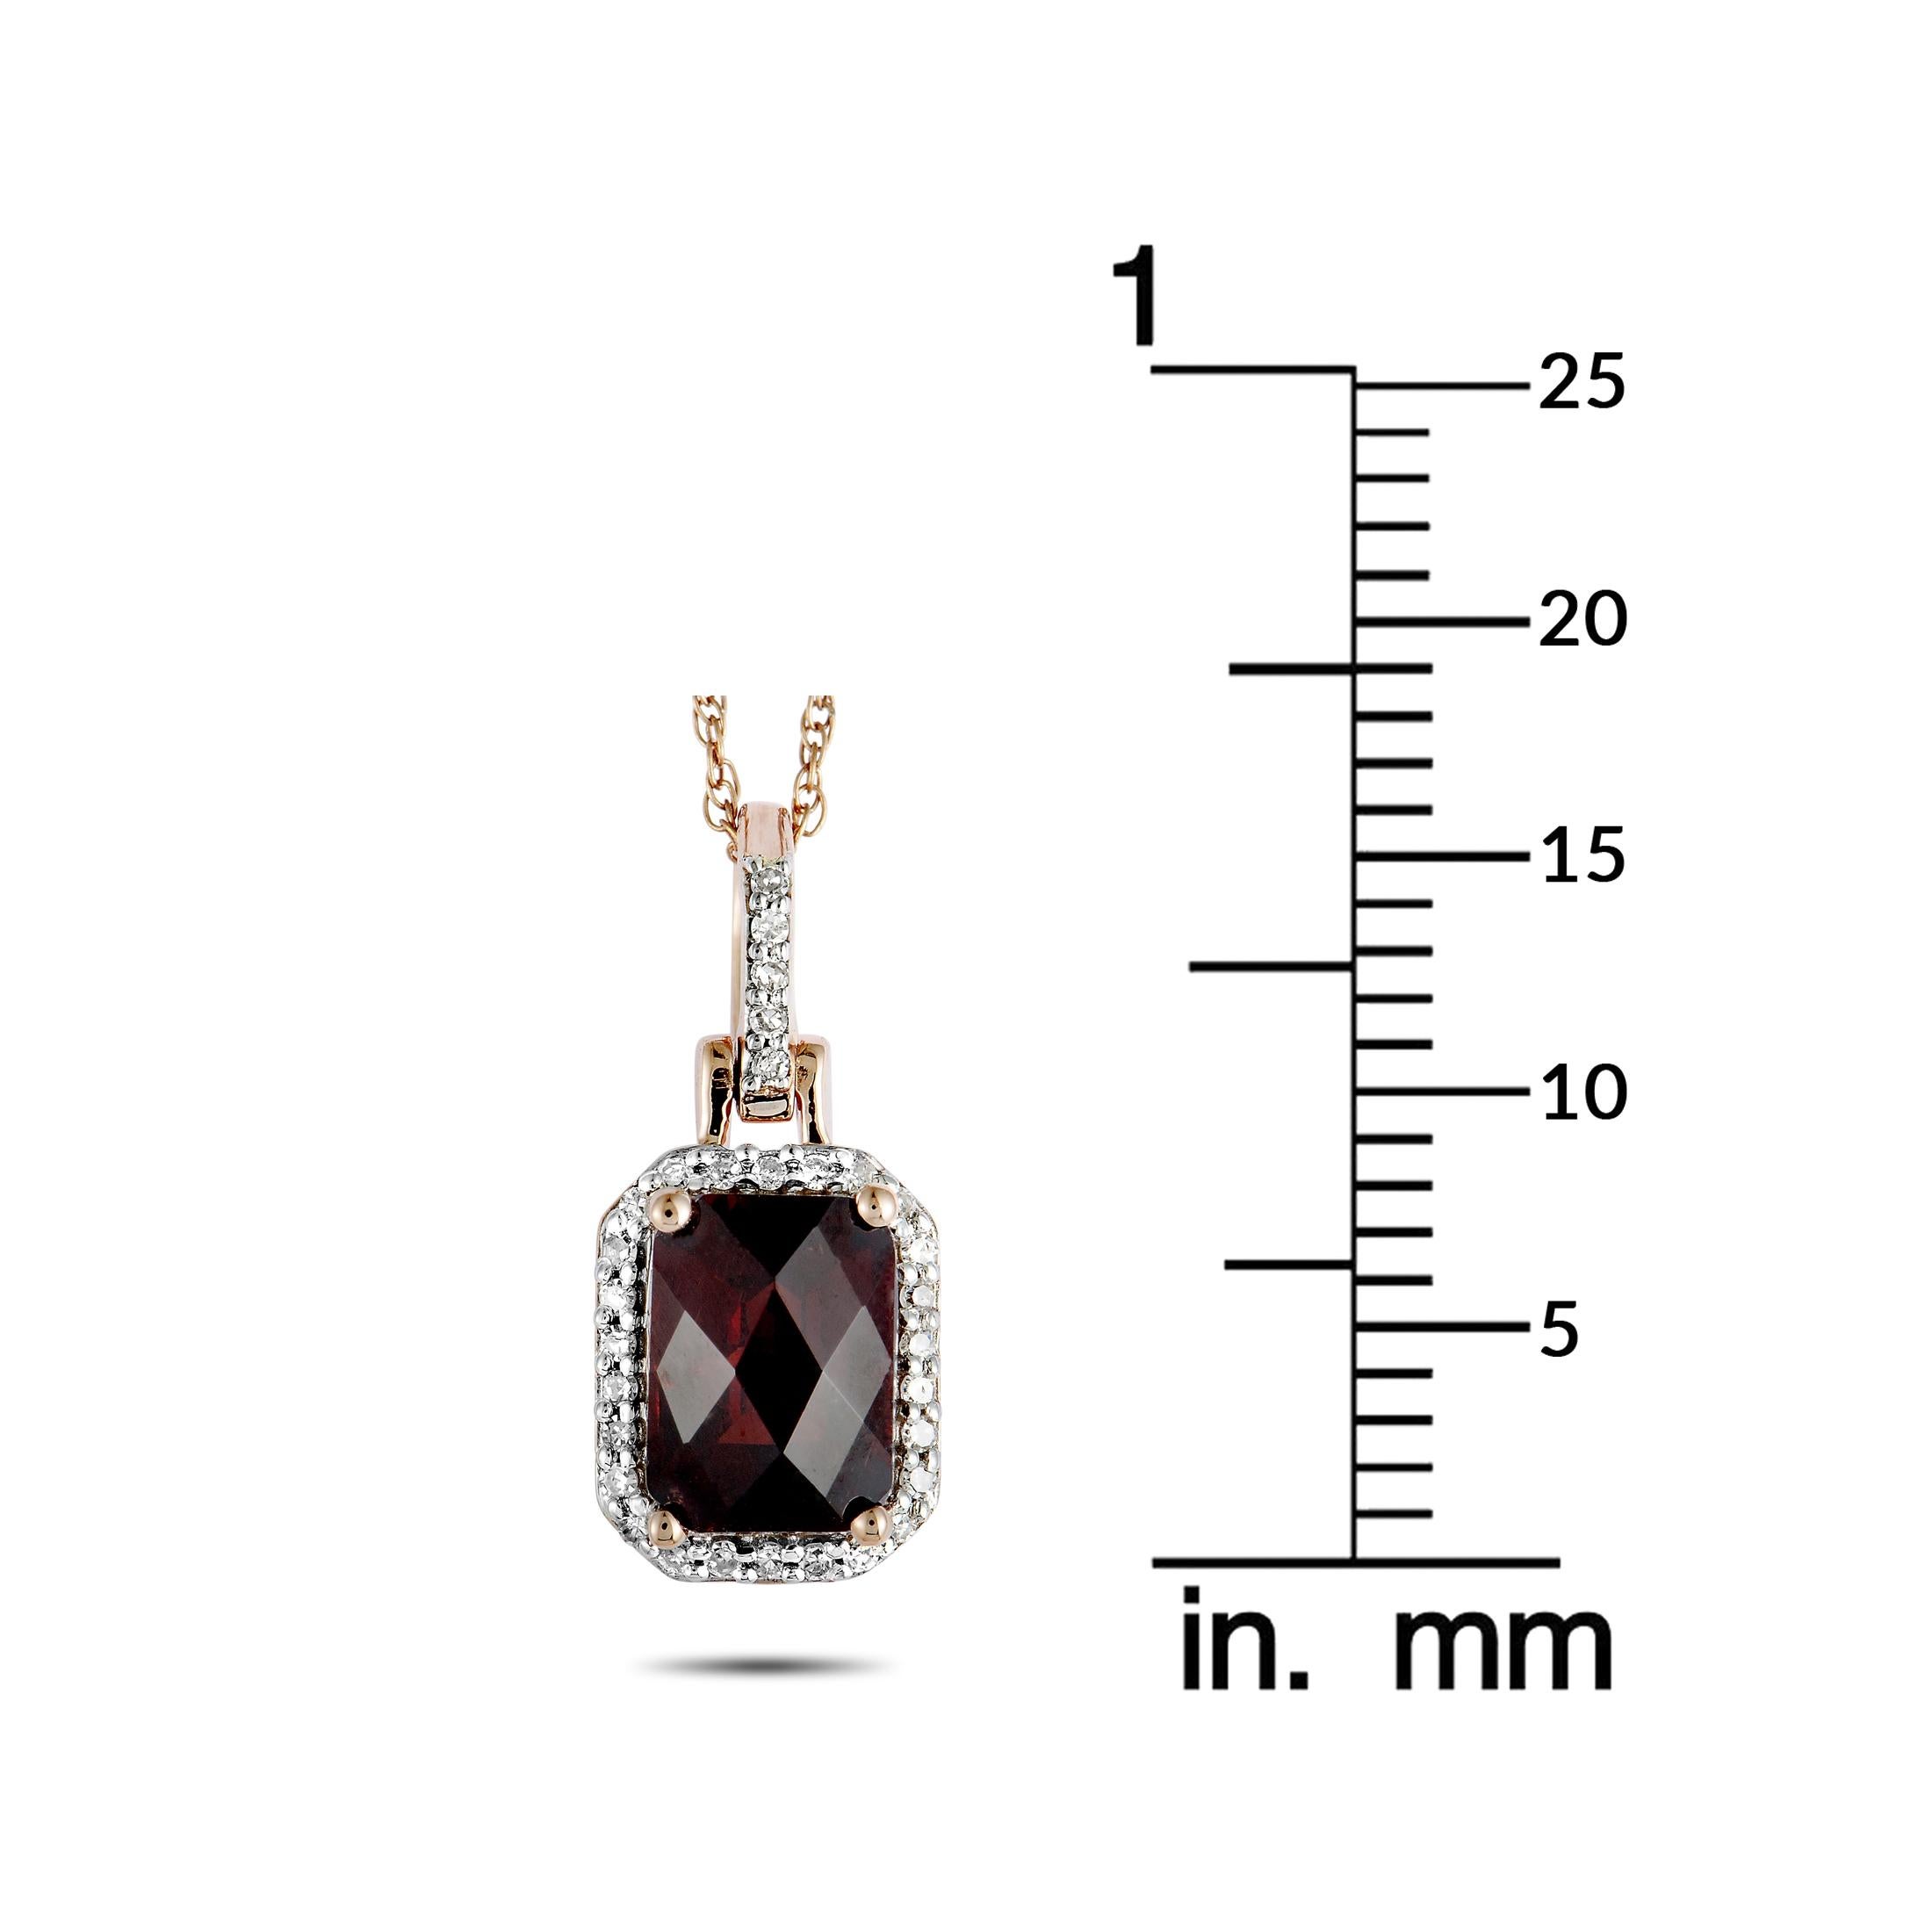 This necklace is made of 14K rose gold and set with a garnet and a total of 0.09 carats of diamonds. It has an 18.00” long chain with spring ring closure, while the pendant measures 0.62” in length and 0.25” in width. The necklace weighs 1.8 grams.
